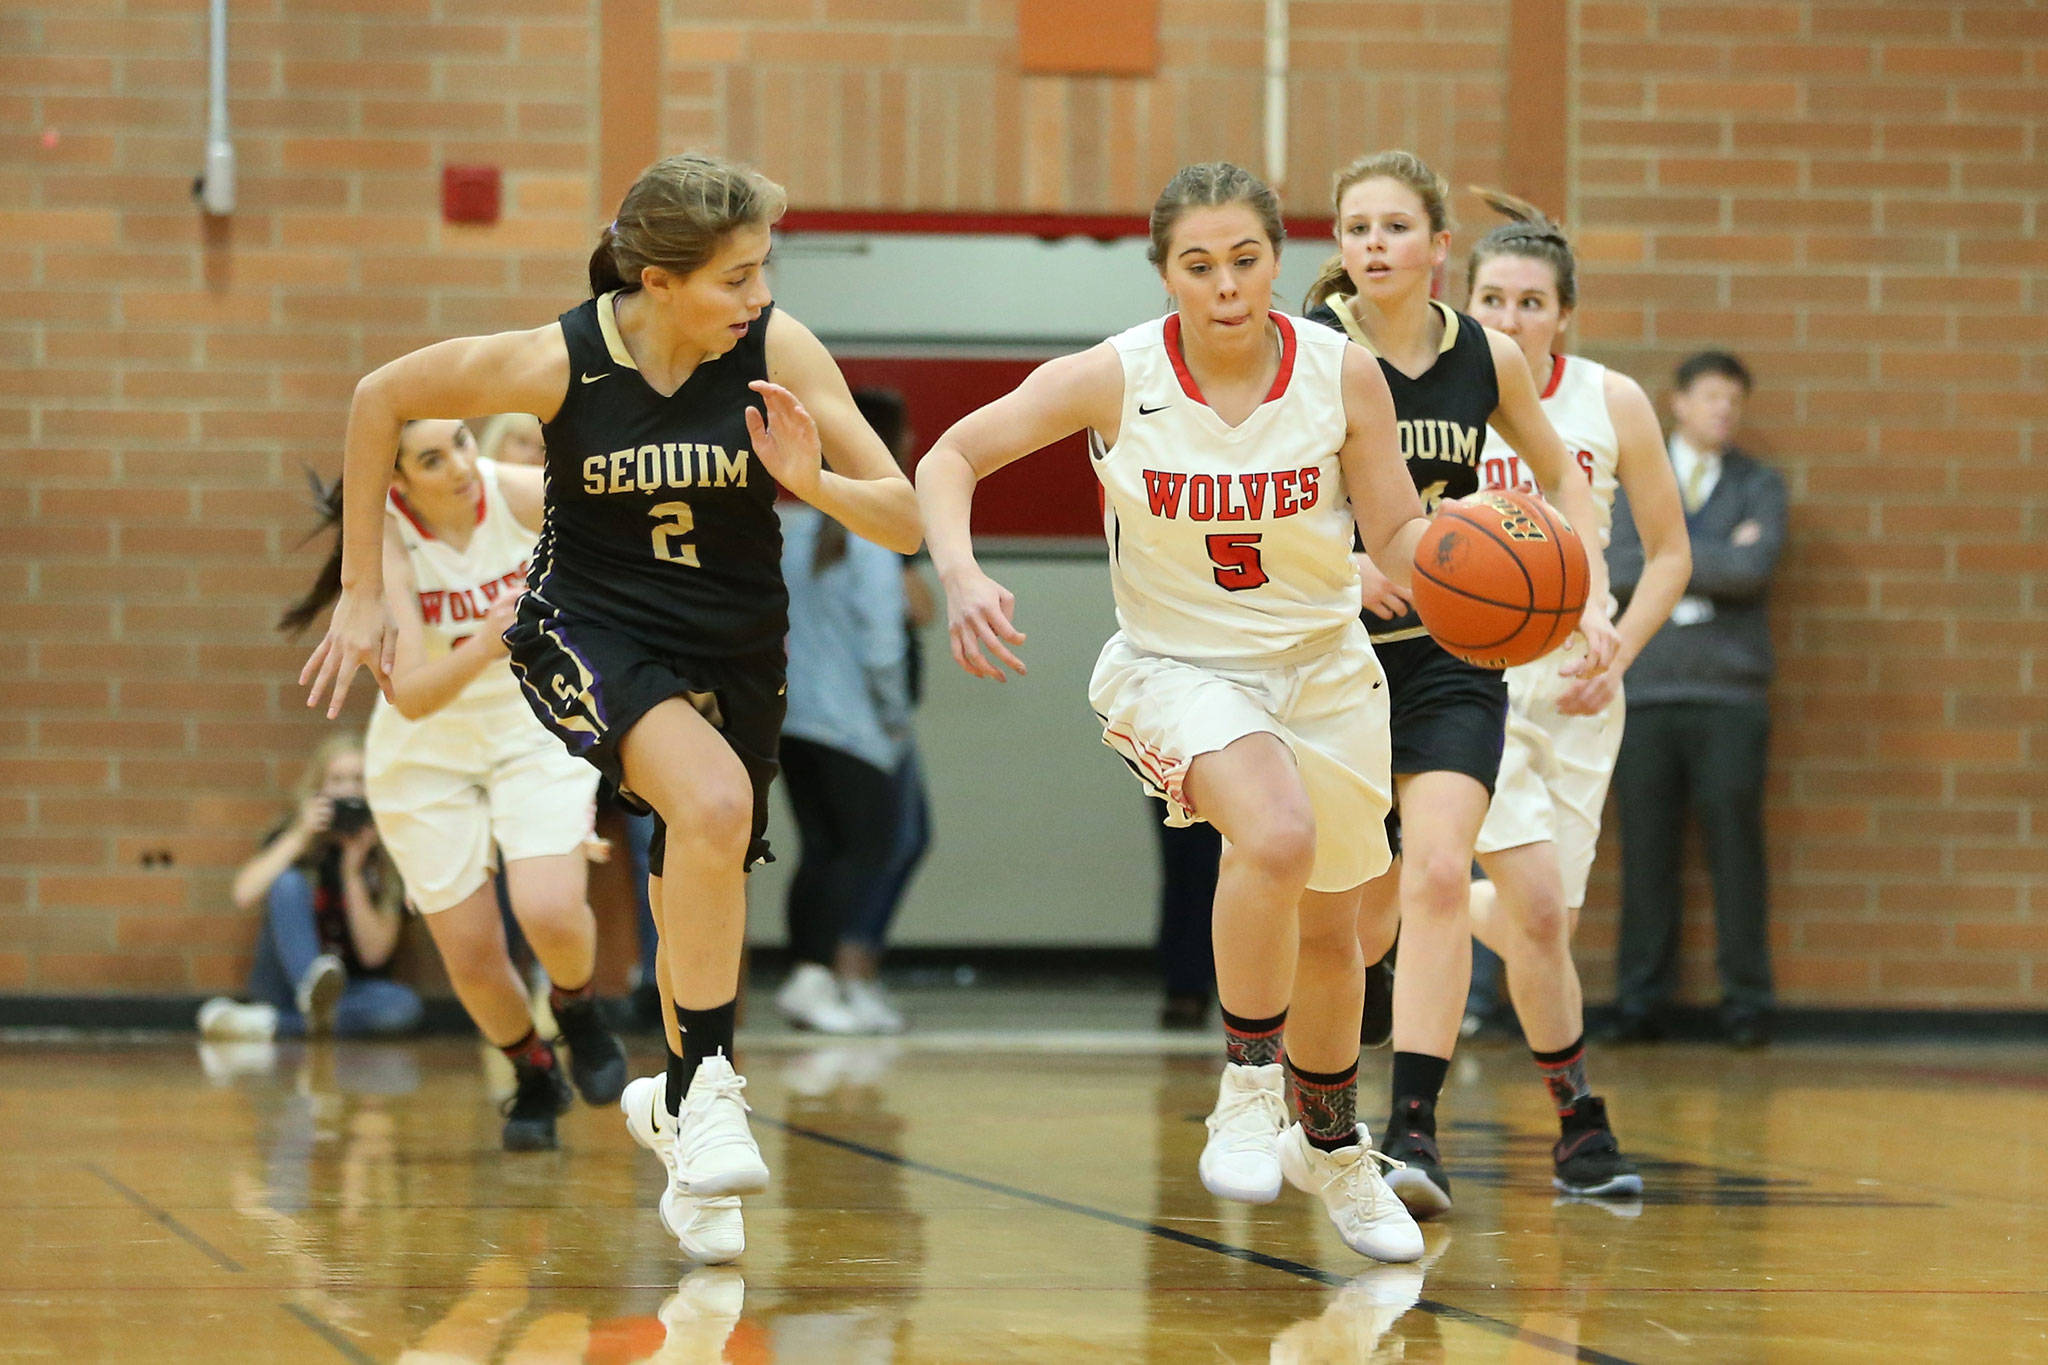 Coupeville’s Kyla Briscoe takes off on a fast break as Sequim’s Jessica Dietzman (2) tries to keep up. (Photo by John Fisken)